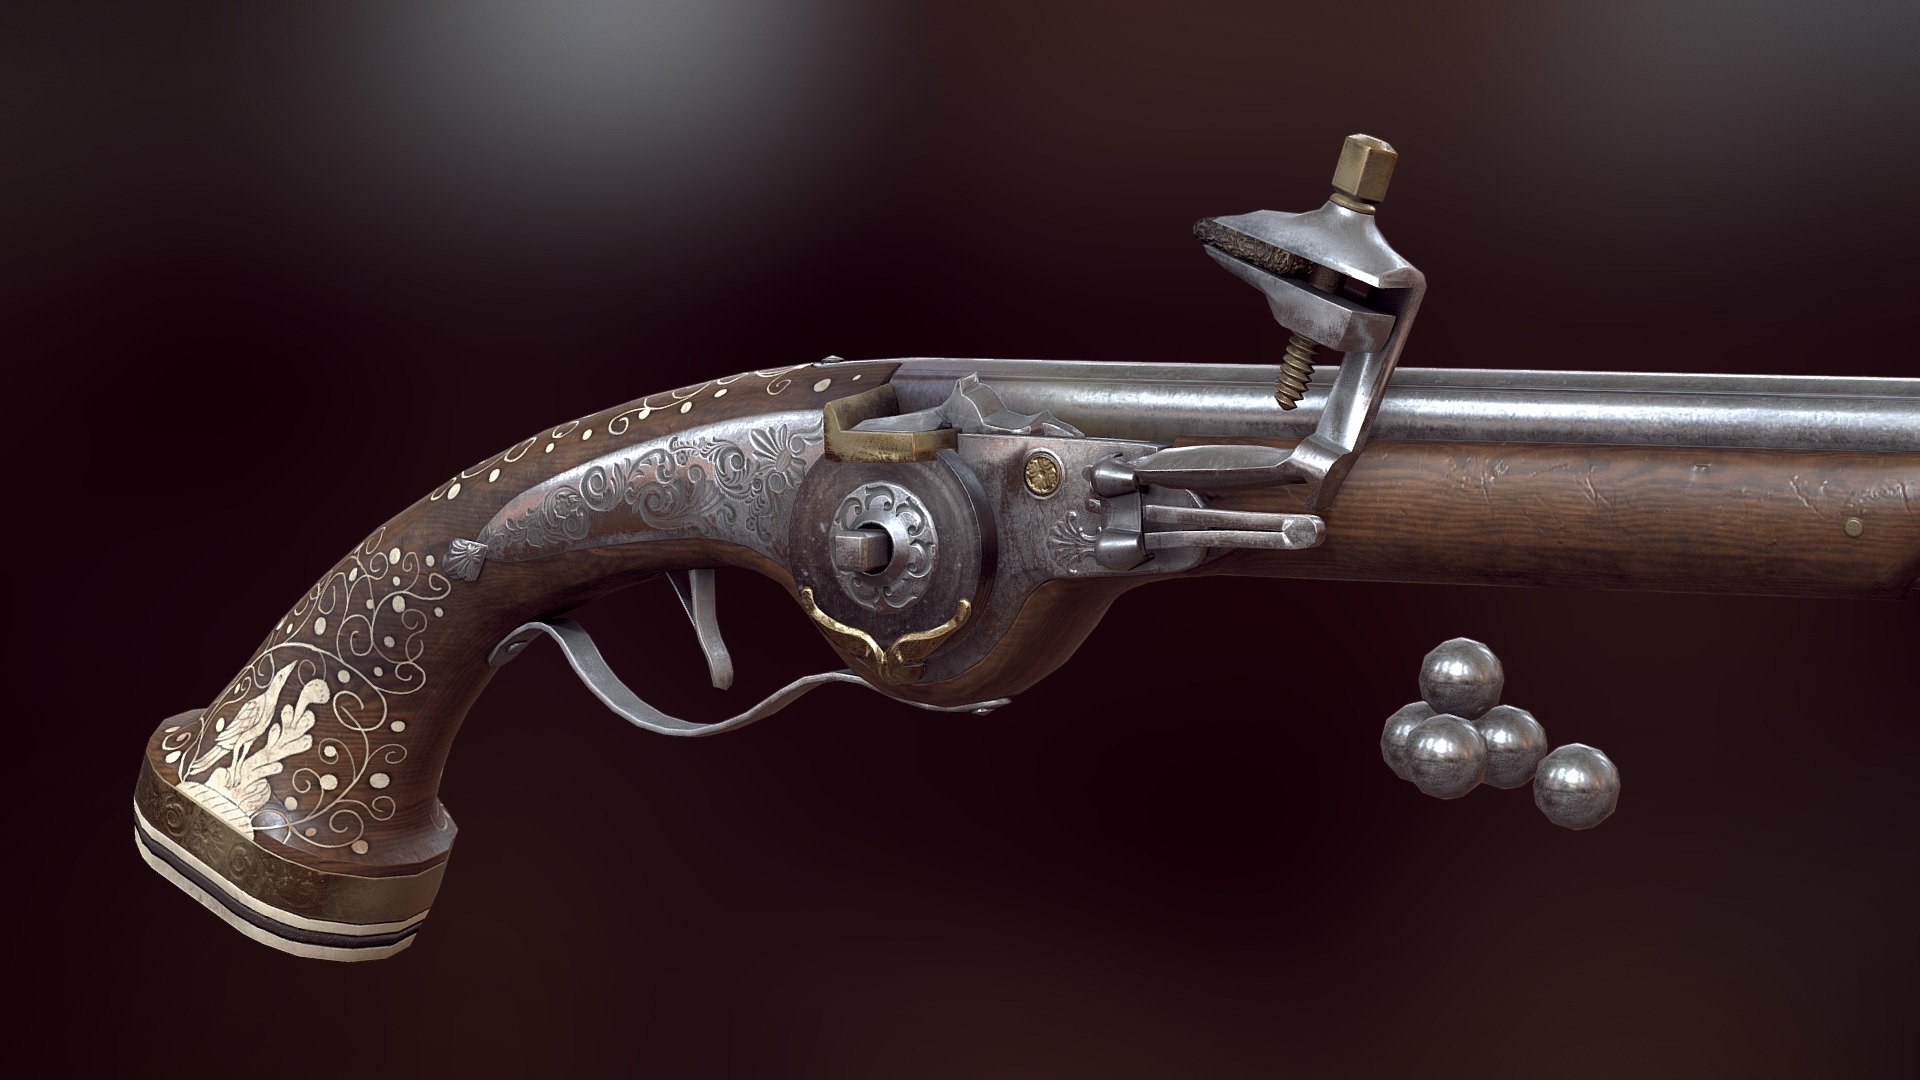 This dutch pistol from the mid 17th century is modeled after a piece found in the Rijksmuseum at Amsterdam. The wheellock was used from the late 15th to 17th century as a more advanced, reliable and expensive variant to the matchlock.

More renders and details: https://www.artstation.com/artwork/xgl52

Source: https://www.rijksmuseum.nl/nl/rijksstudio/kunstwerken/vuurwapens/objecten#/NG-2002-23-99,6

Made with Blender and Substance Painter
Model is rigged and ready for use ingame 3d model